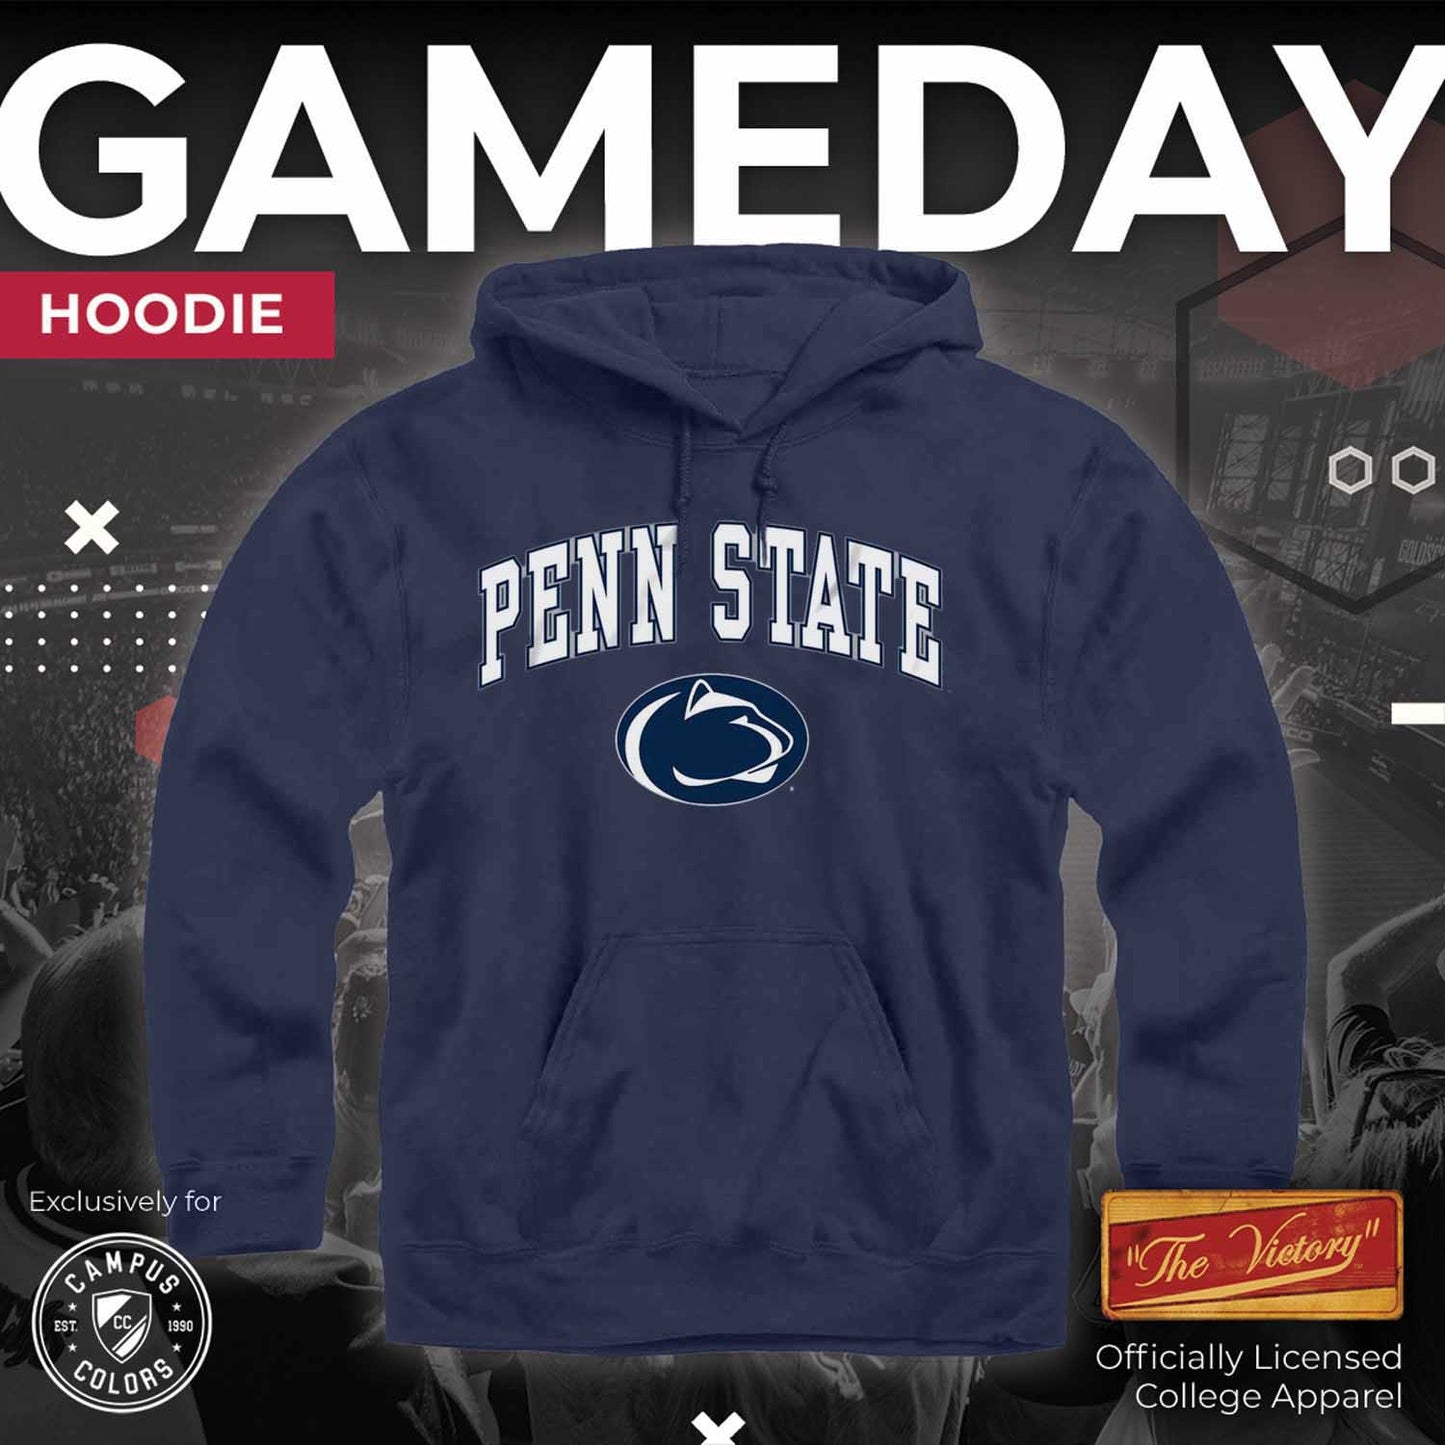 Penn State Nittany Lions Adult Arch & Logo Soft Style Gameday Hooded Sweatshirt - Navy